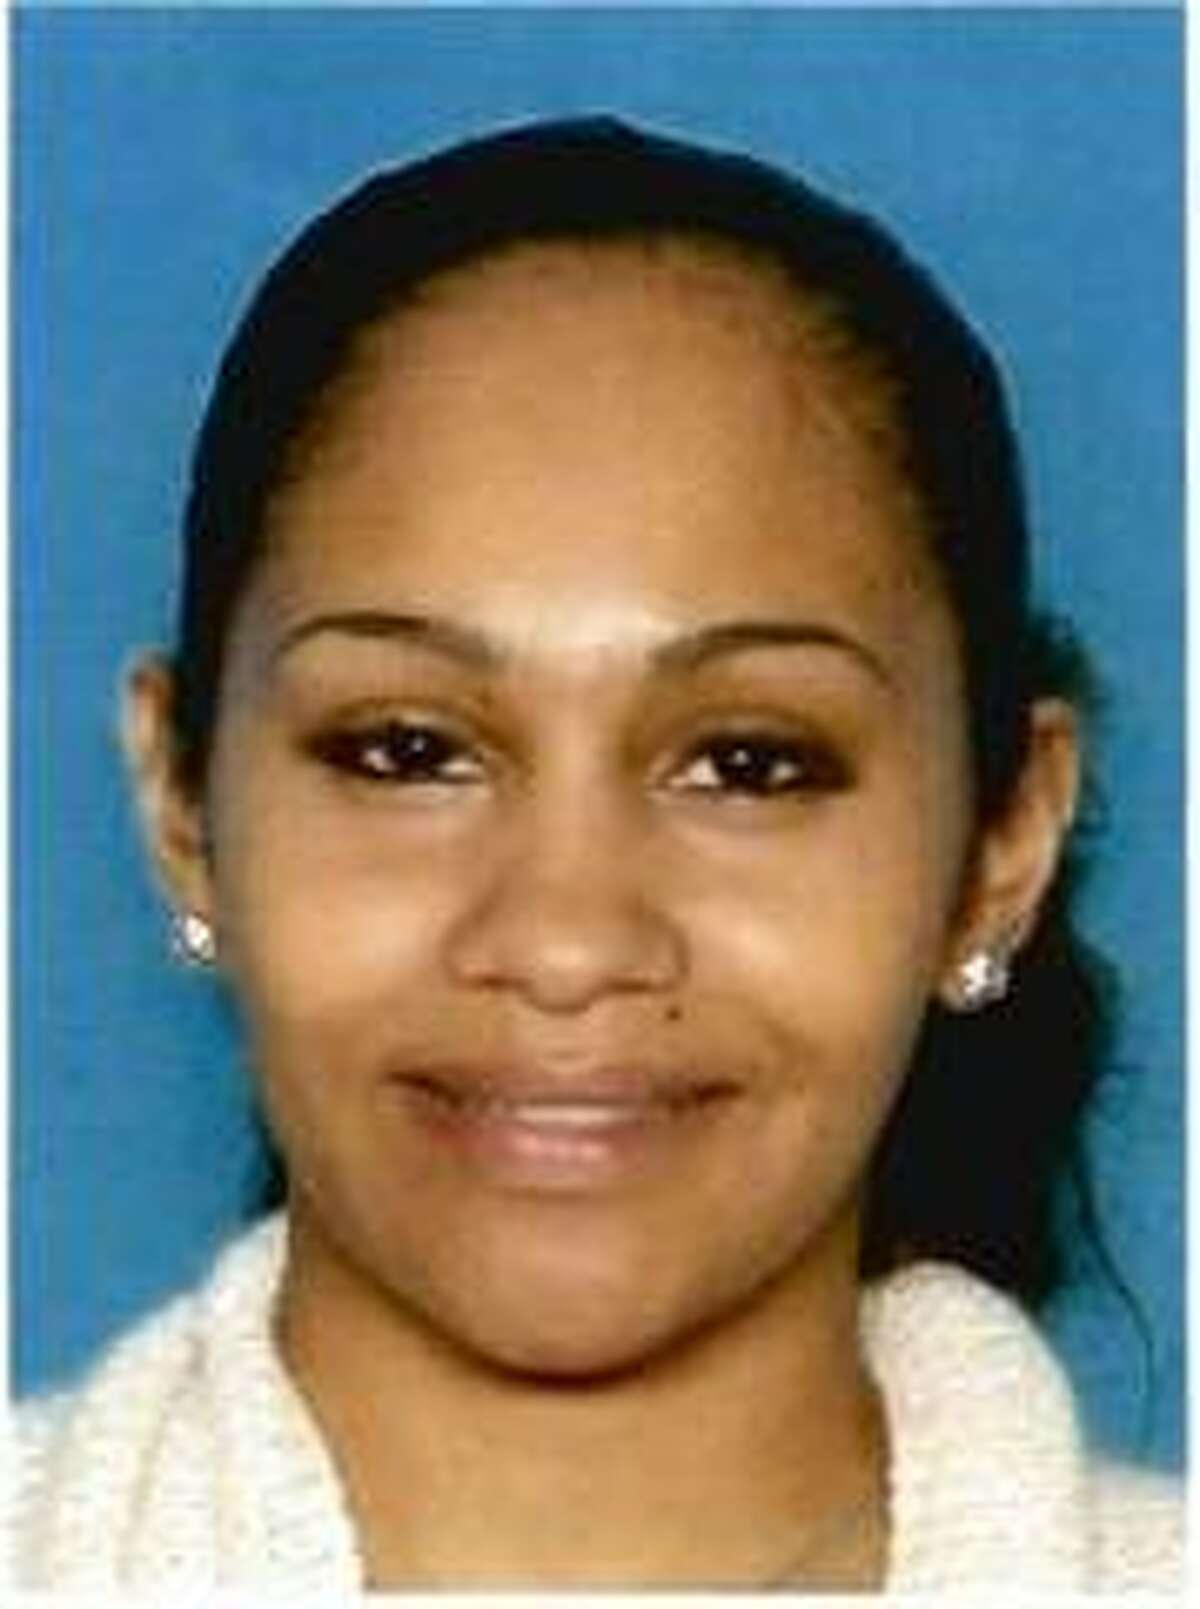 Amalia Alexander was reported missing on Sept. 20, 2016. The skeletal remains of a female were found on Nov. 30, 2016 in Montgomery County. The medical examiner's office confirmed the remains were that of Alexander. Click through the slideshow to see the deadliest murders in Houston. 